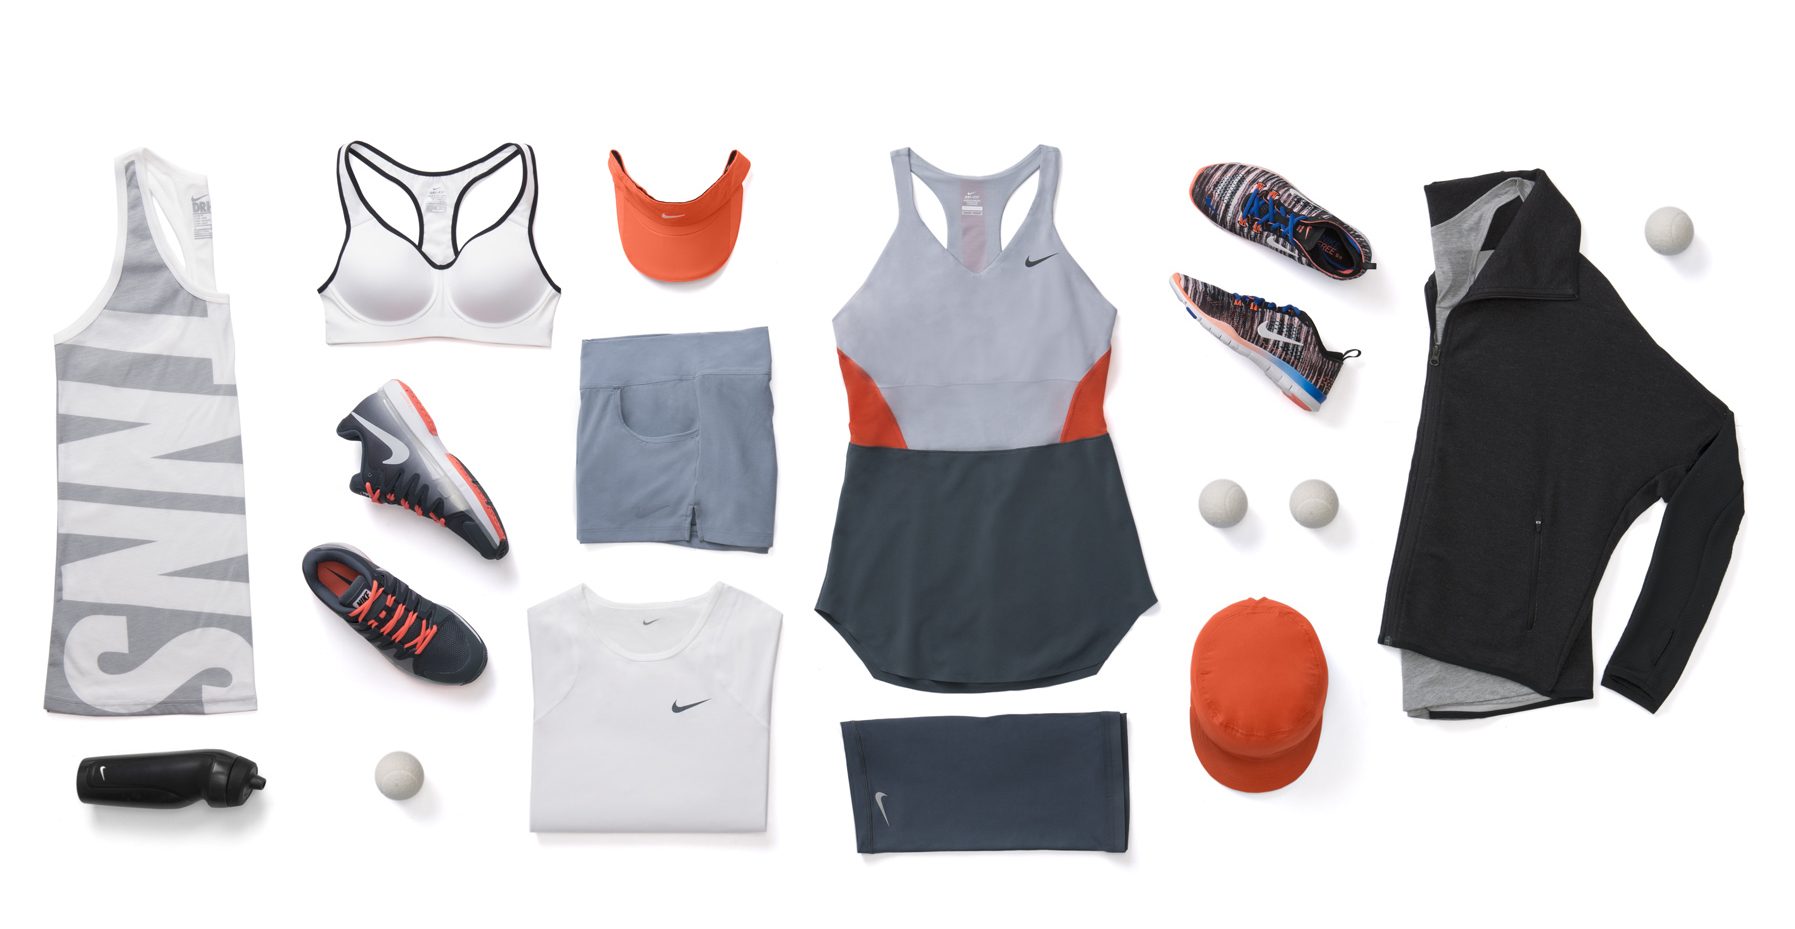 Top 5 Looks from Nike Fall 2 Collection for Women